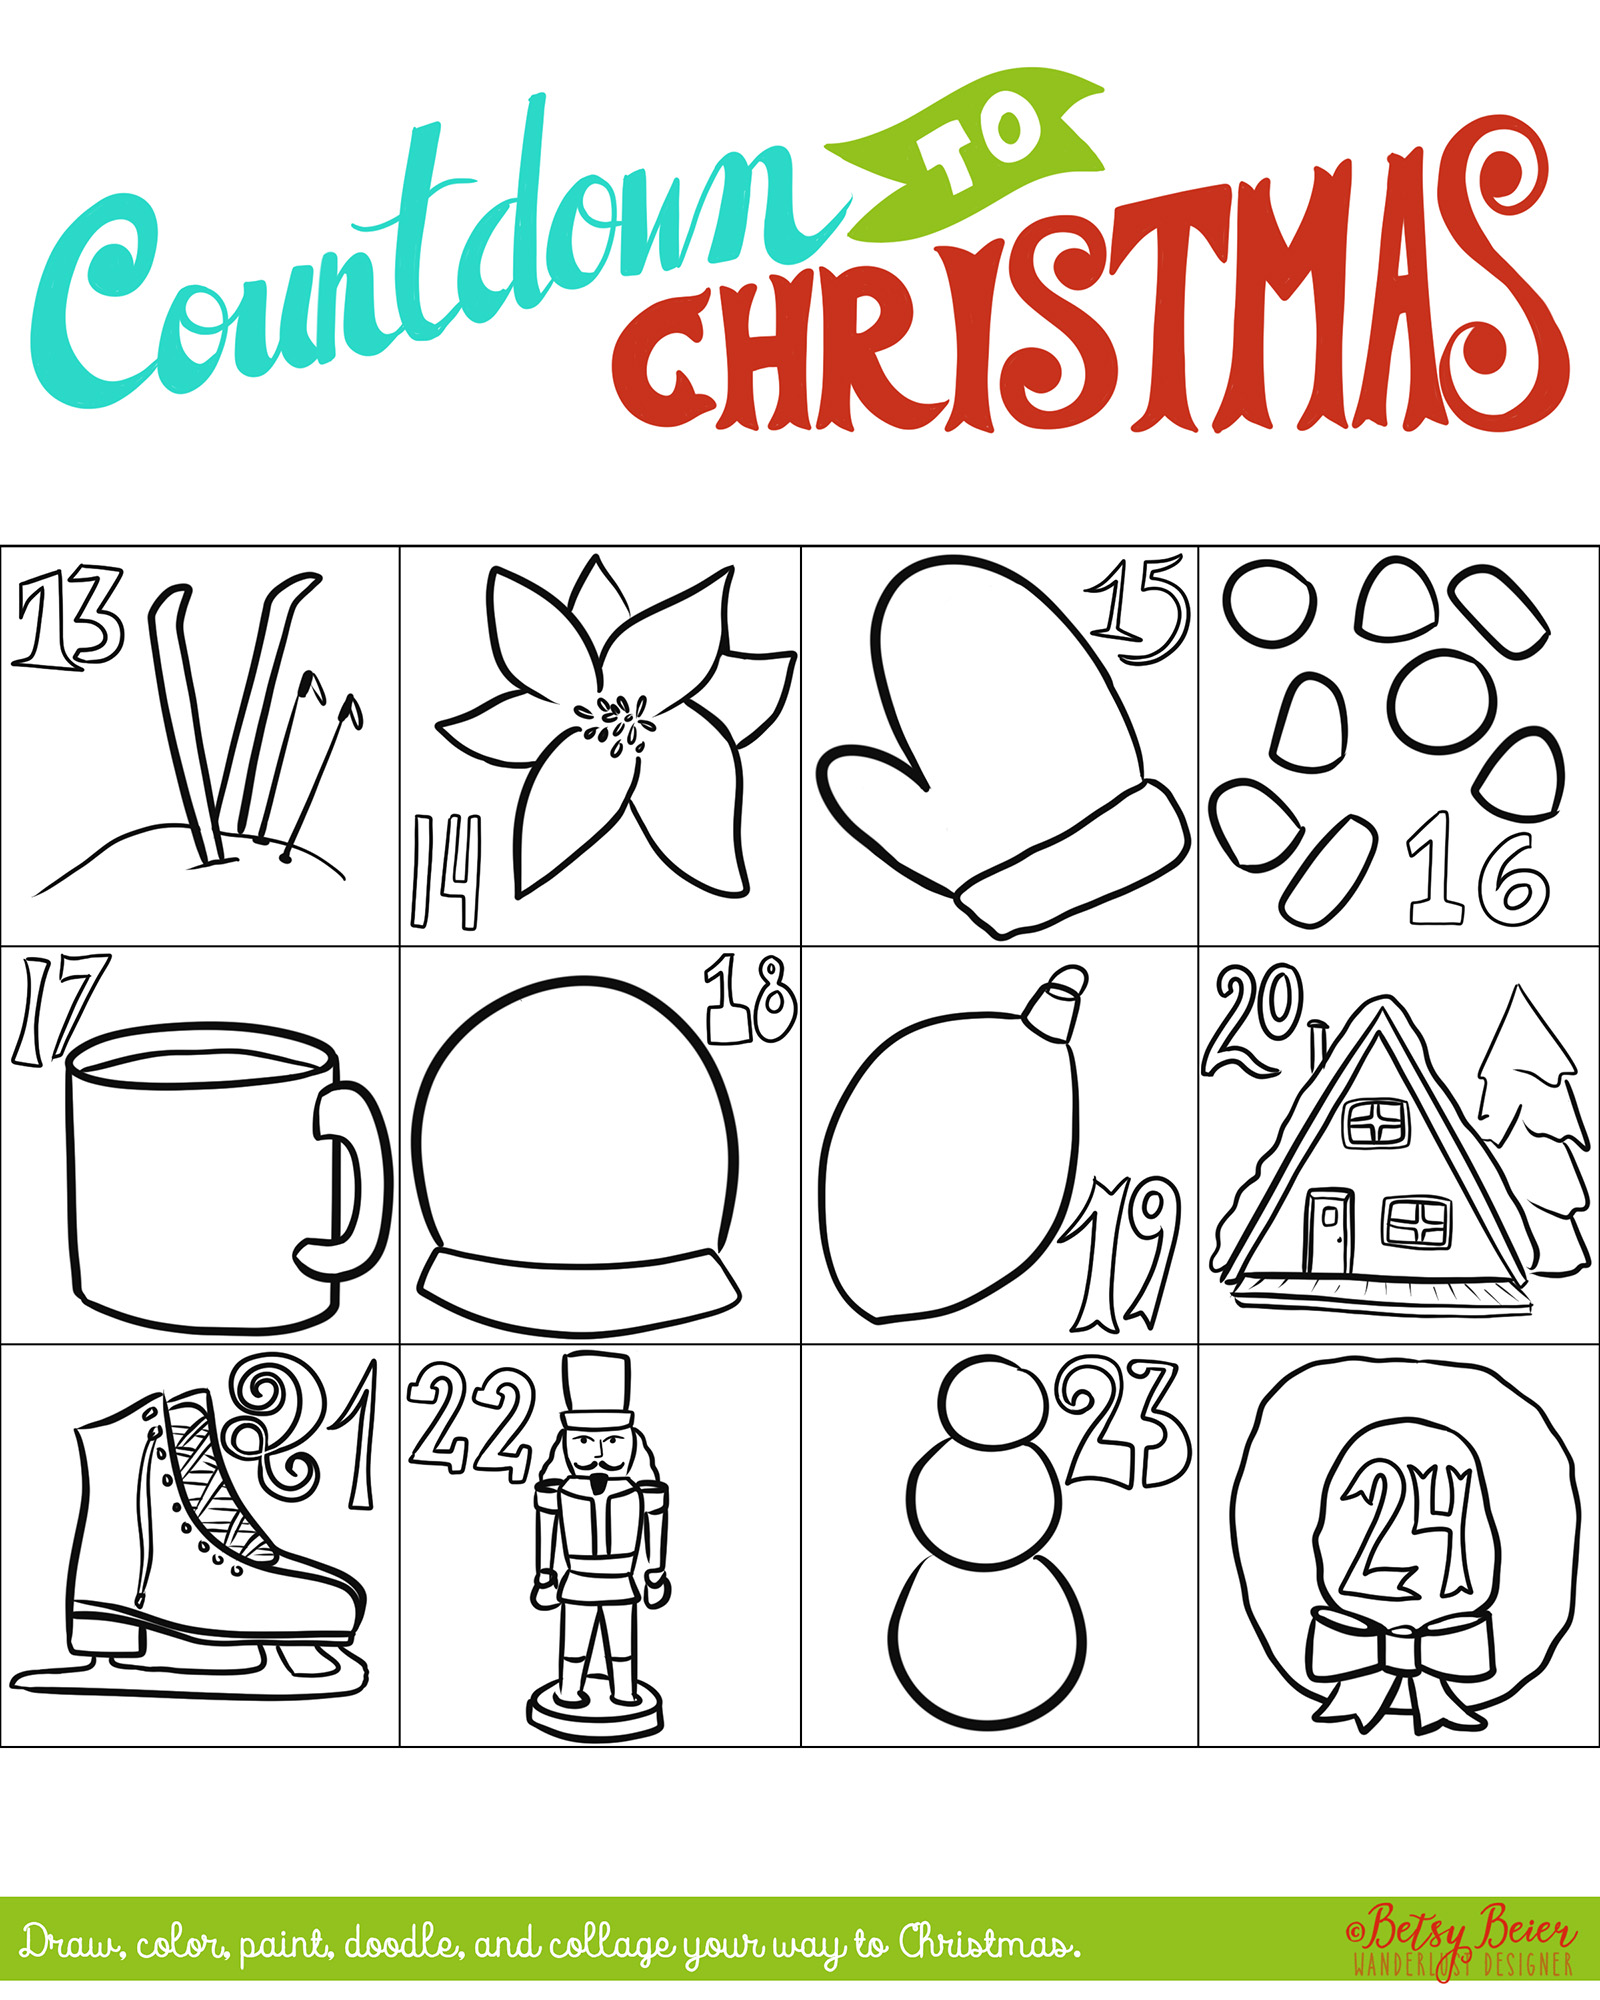 Free Printable Countdown to Christmas Art Project - Days 13-24 by Betsy Beier